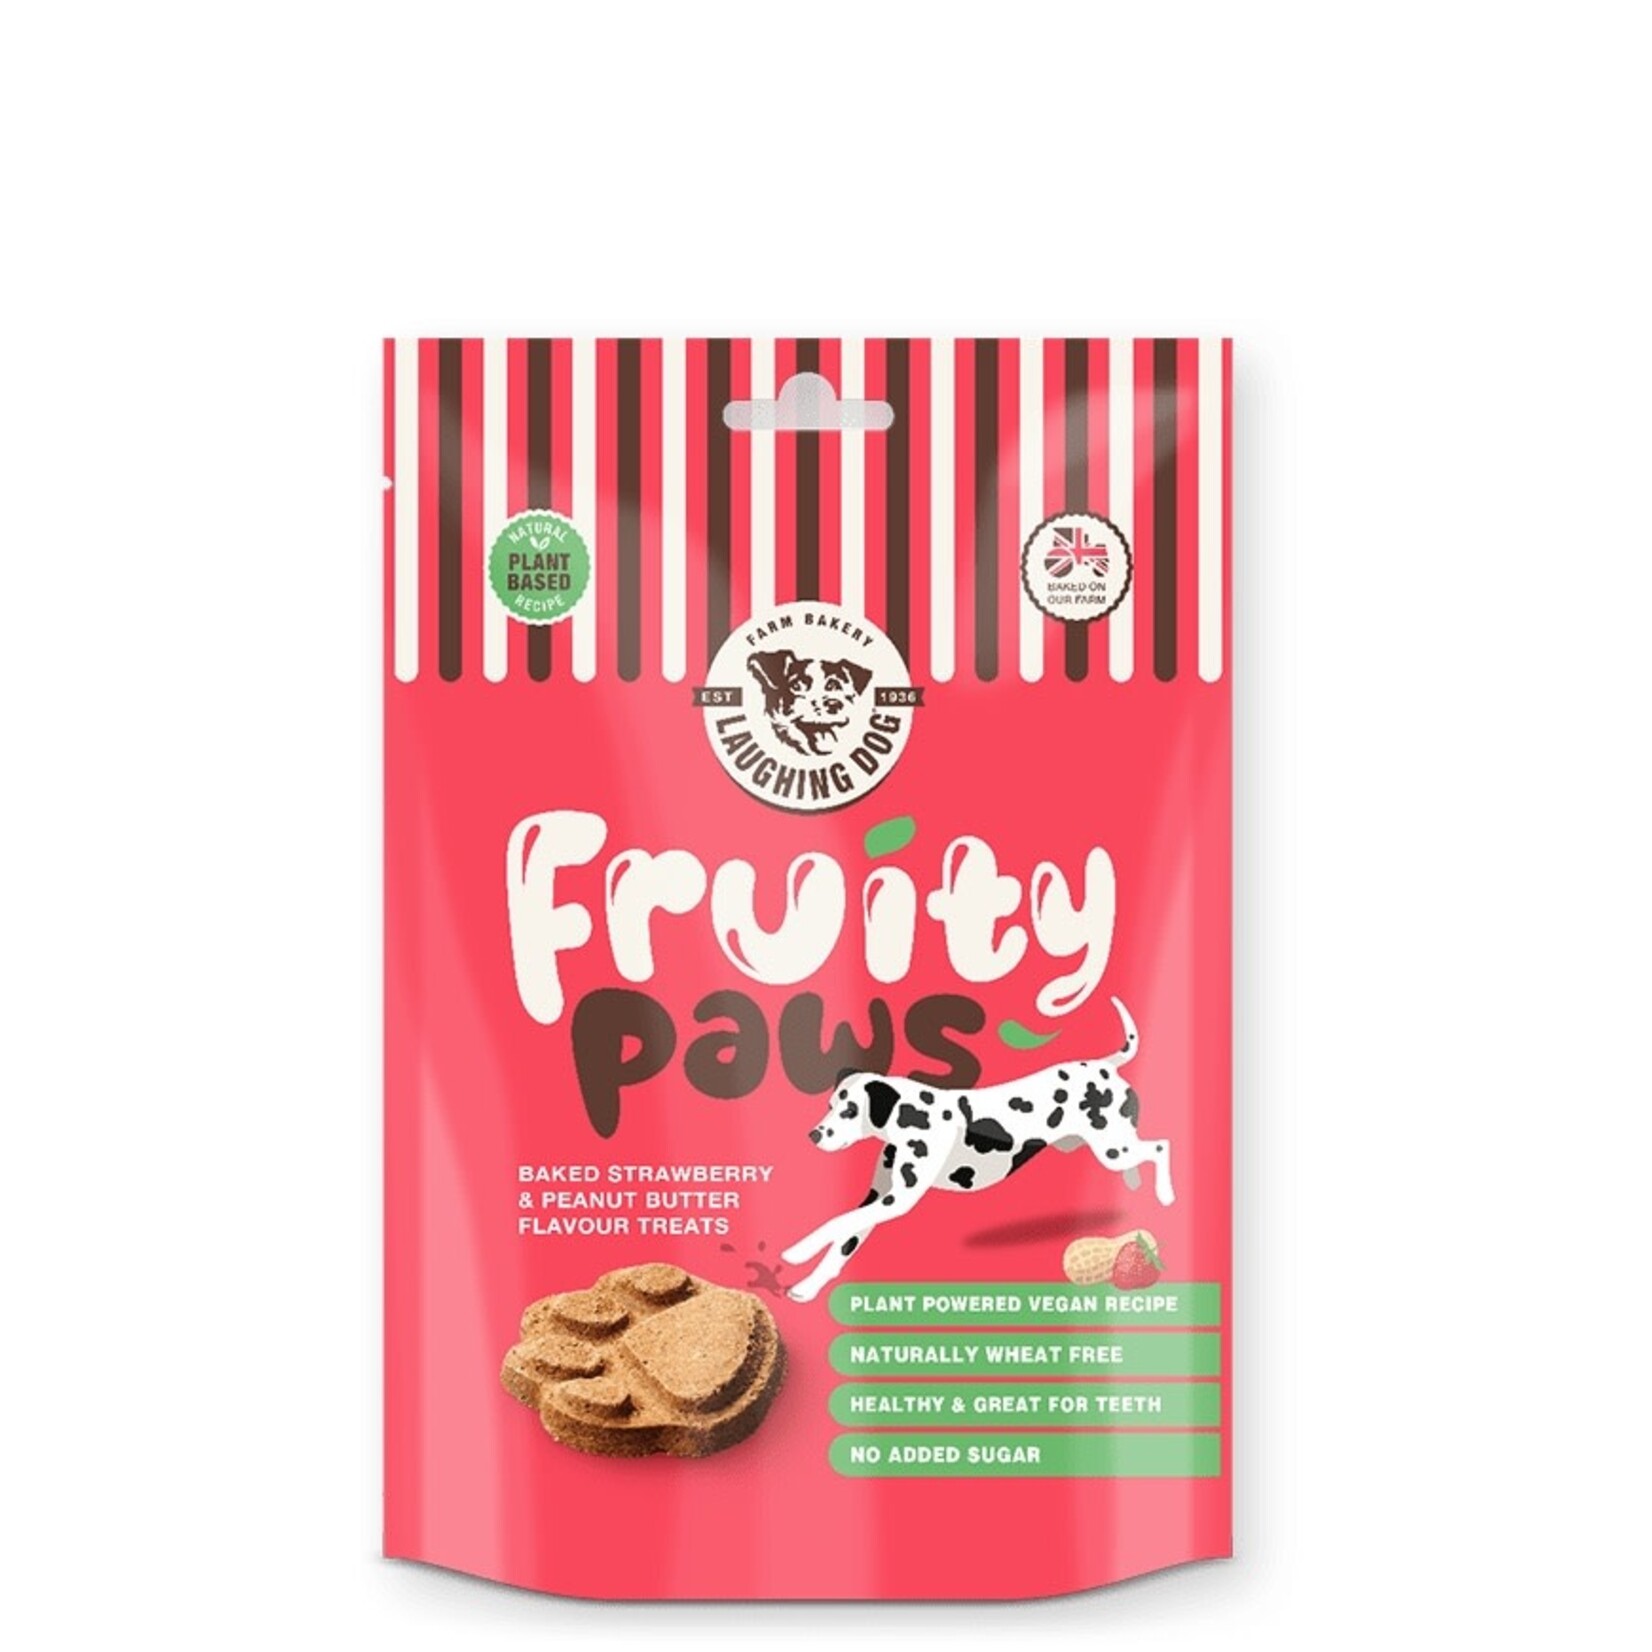 Laughing Dog Wheat Free Fruity Paws Strawberry & Peanut Butter Dog Treats, 125g